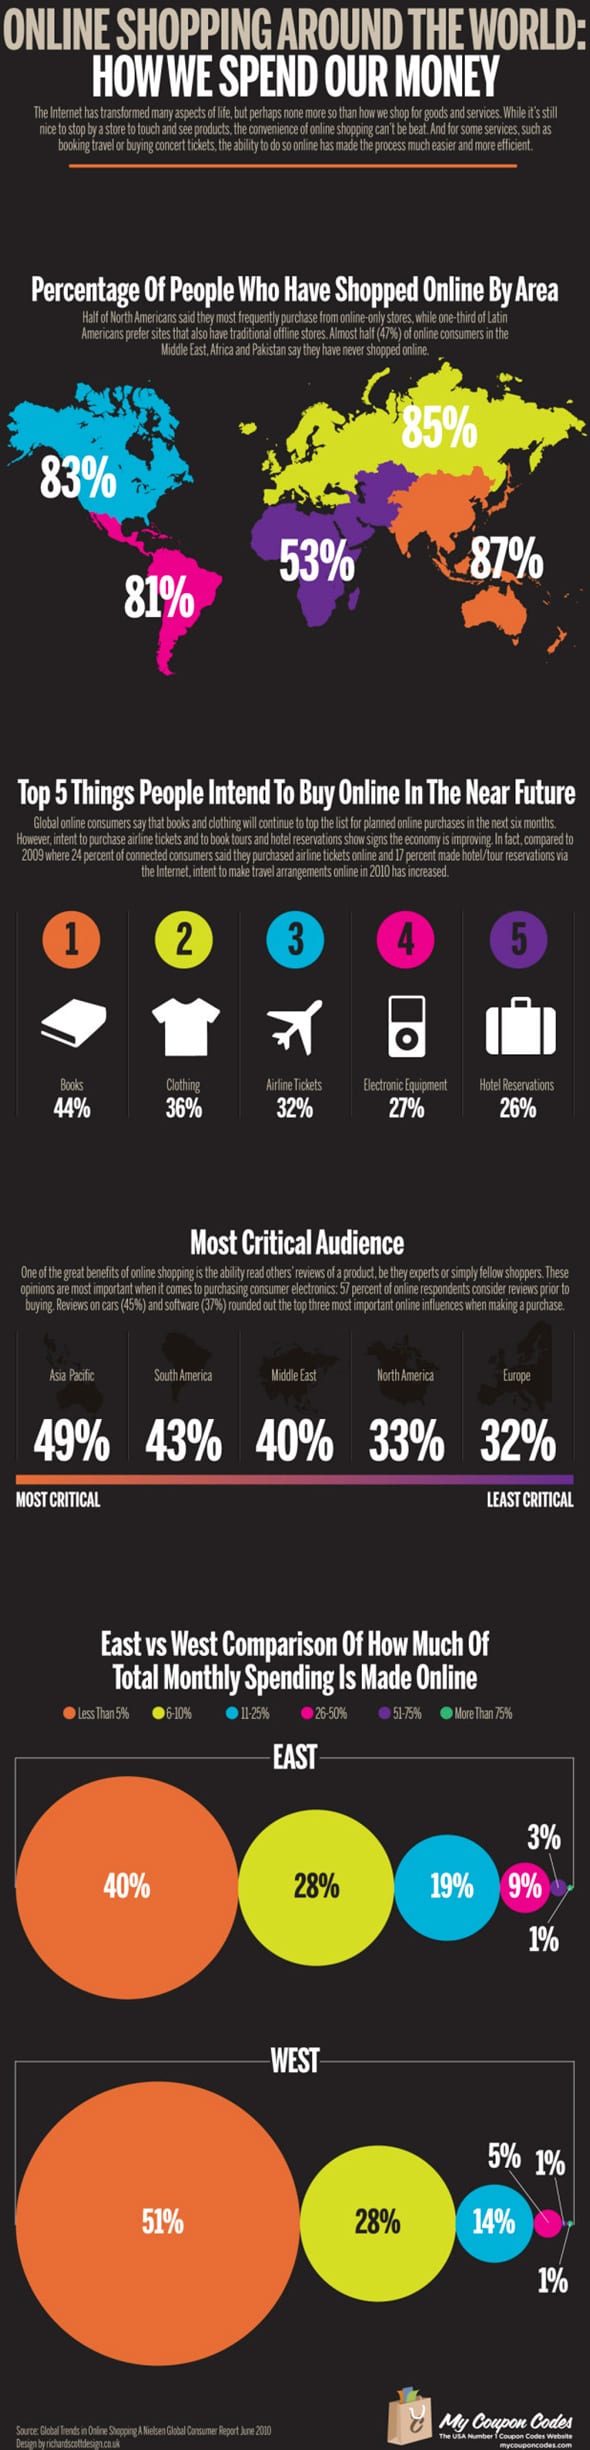 infographic_ecommerce_online-shopping-around-the-world